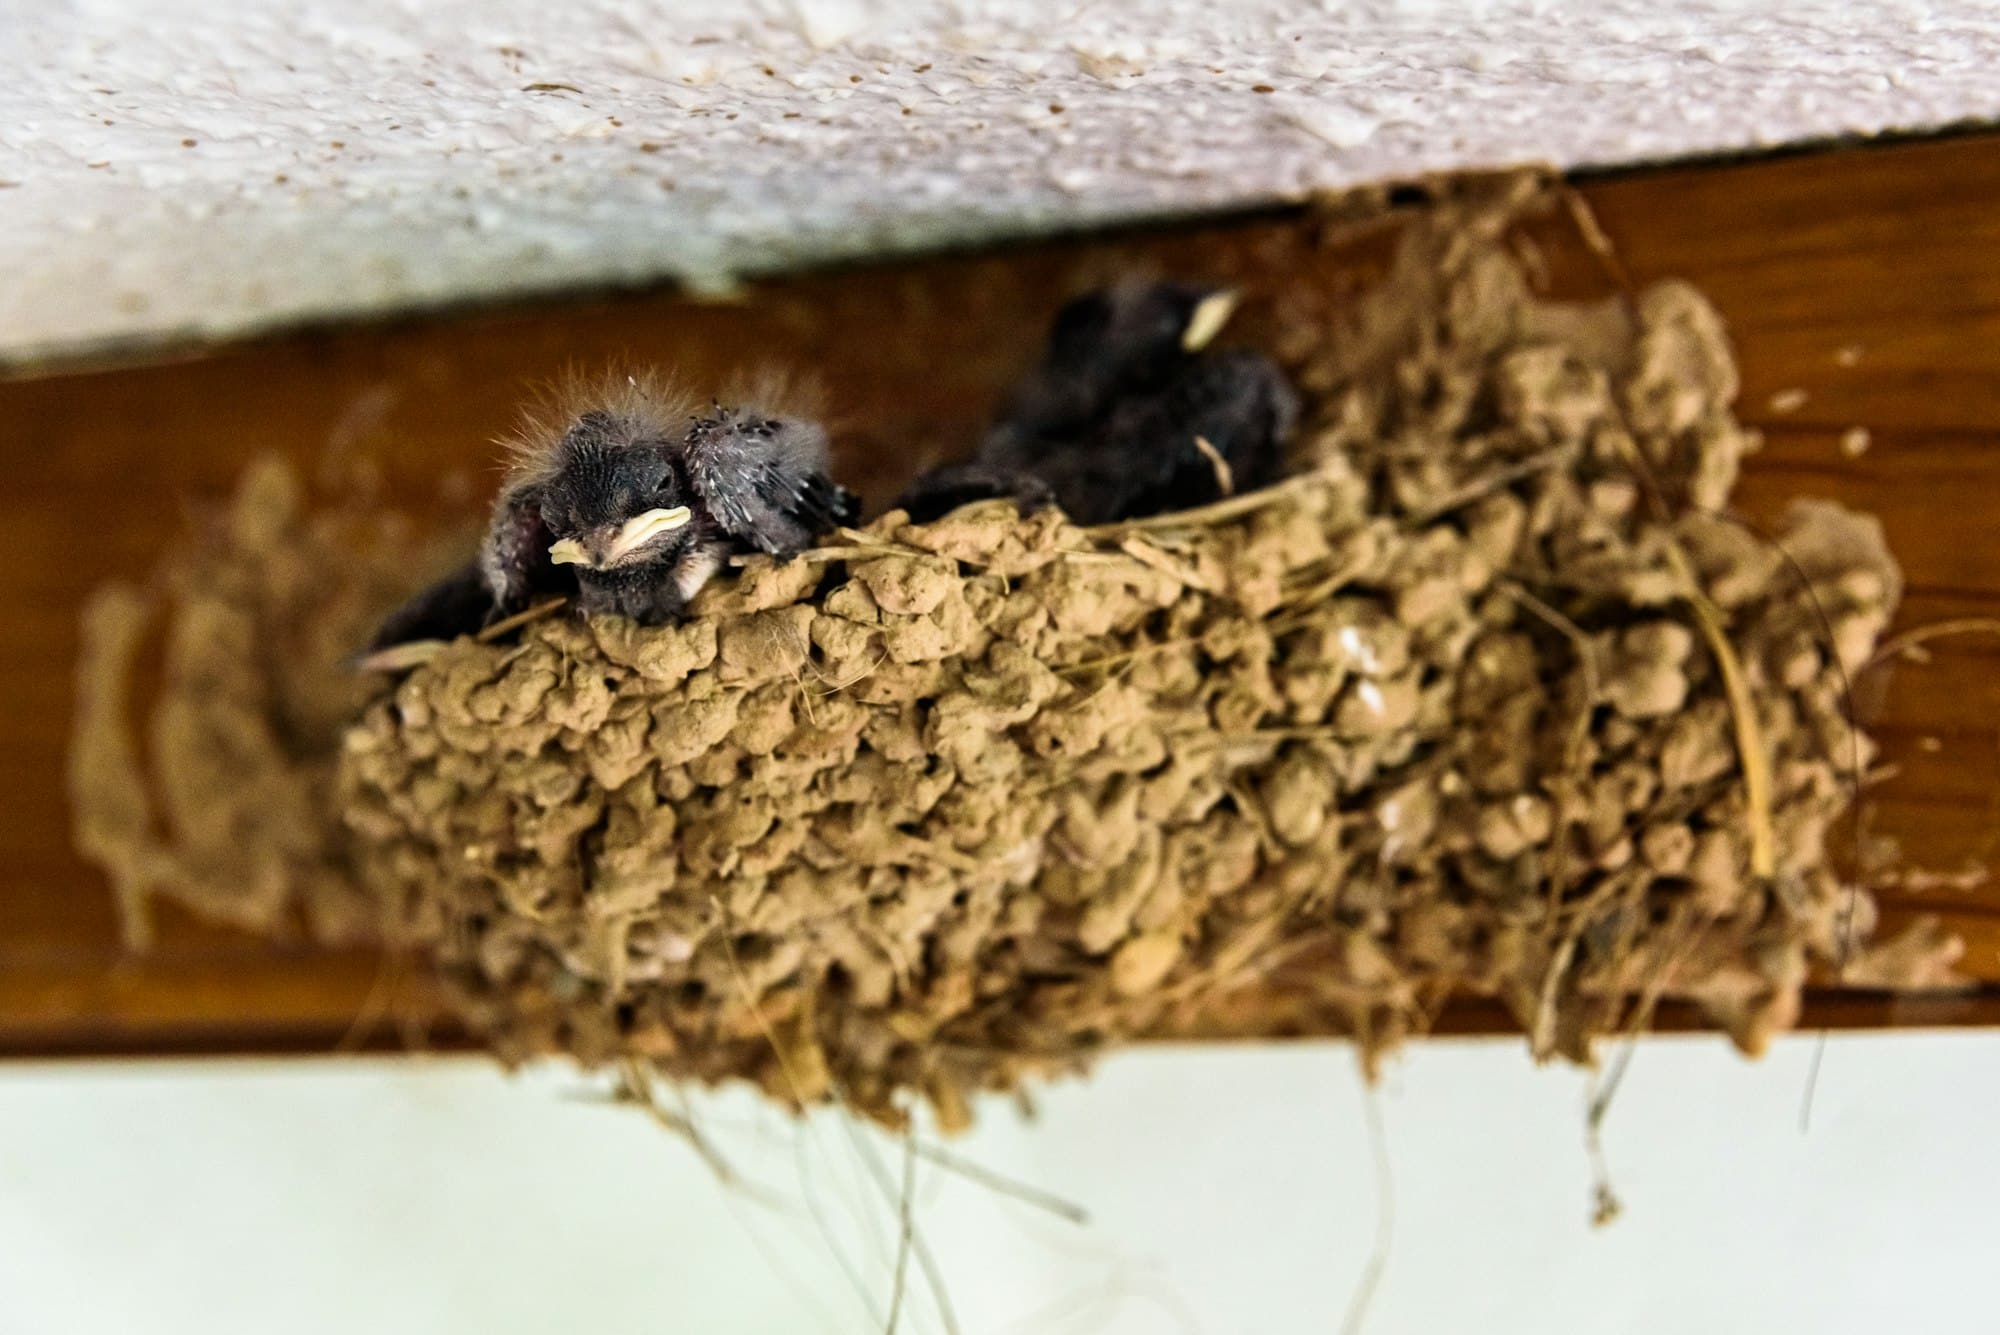 Group of chicks of swallows, hirundo rustica, inside their nest made with mud